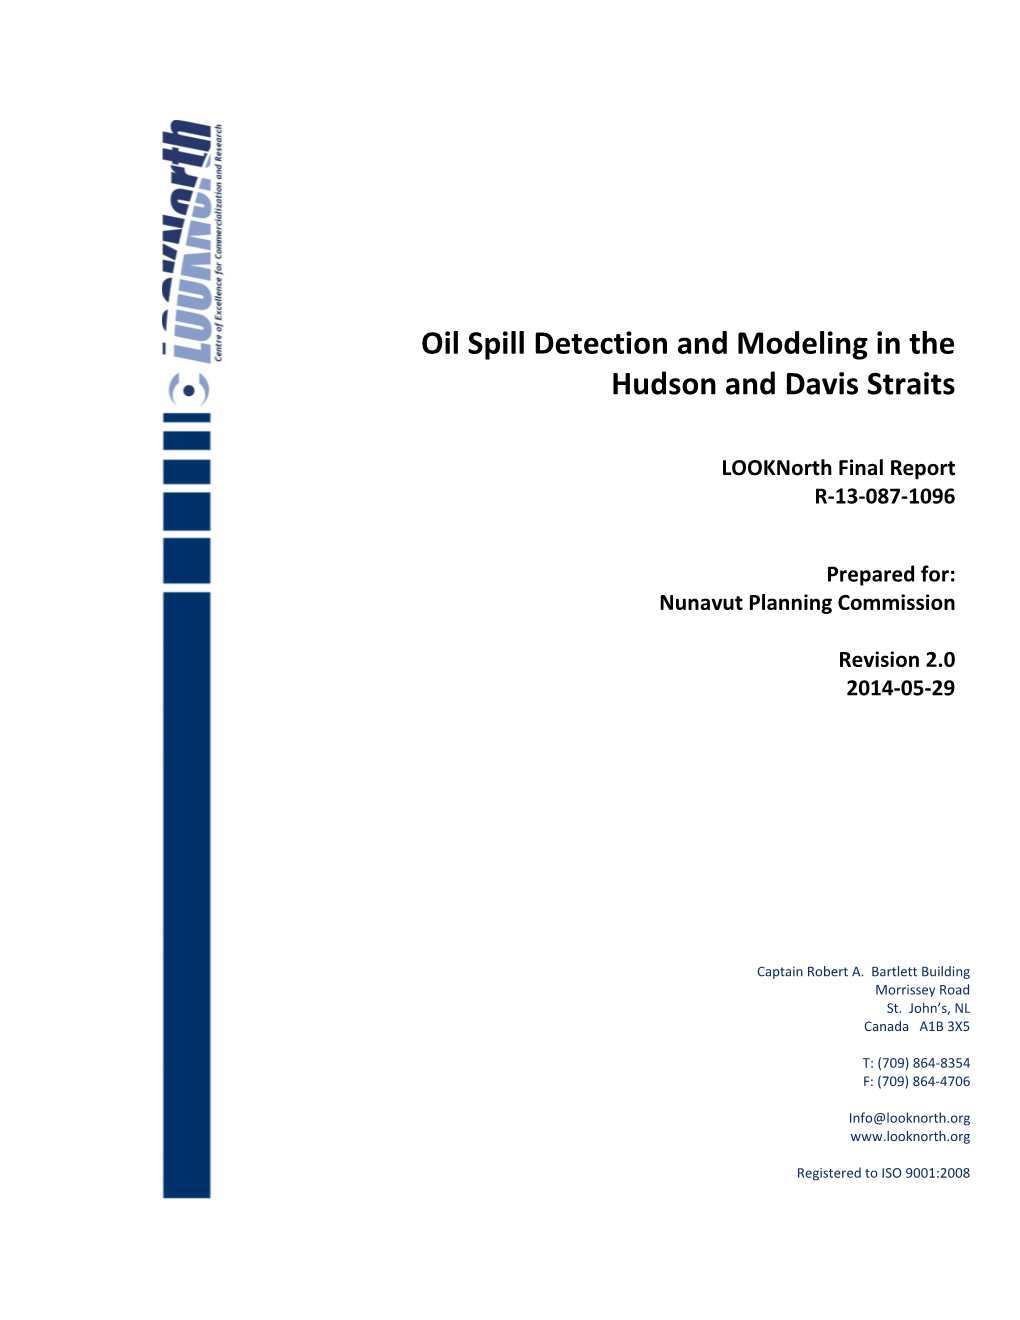 Oil Spill Detection and Modeling in the Hudson and Davis Straits